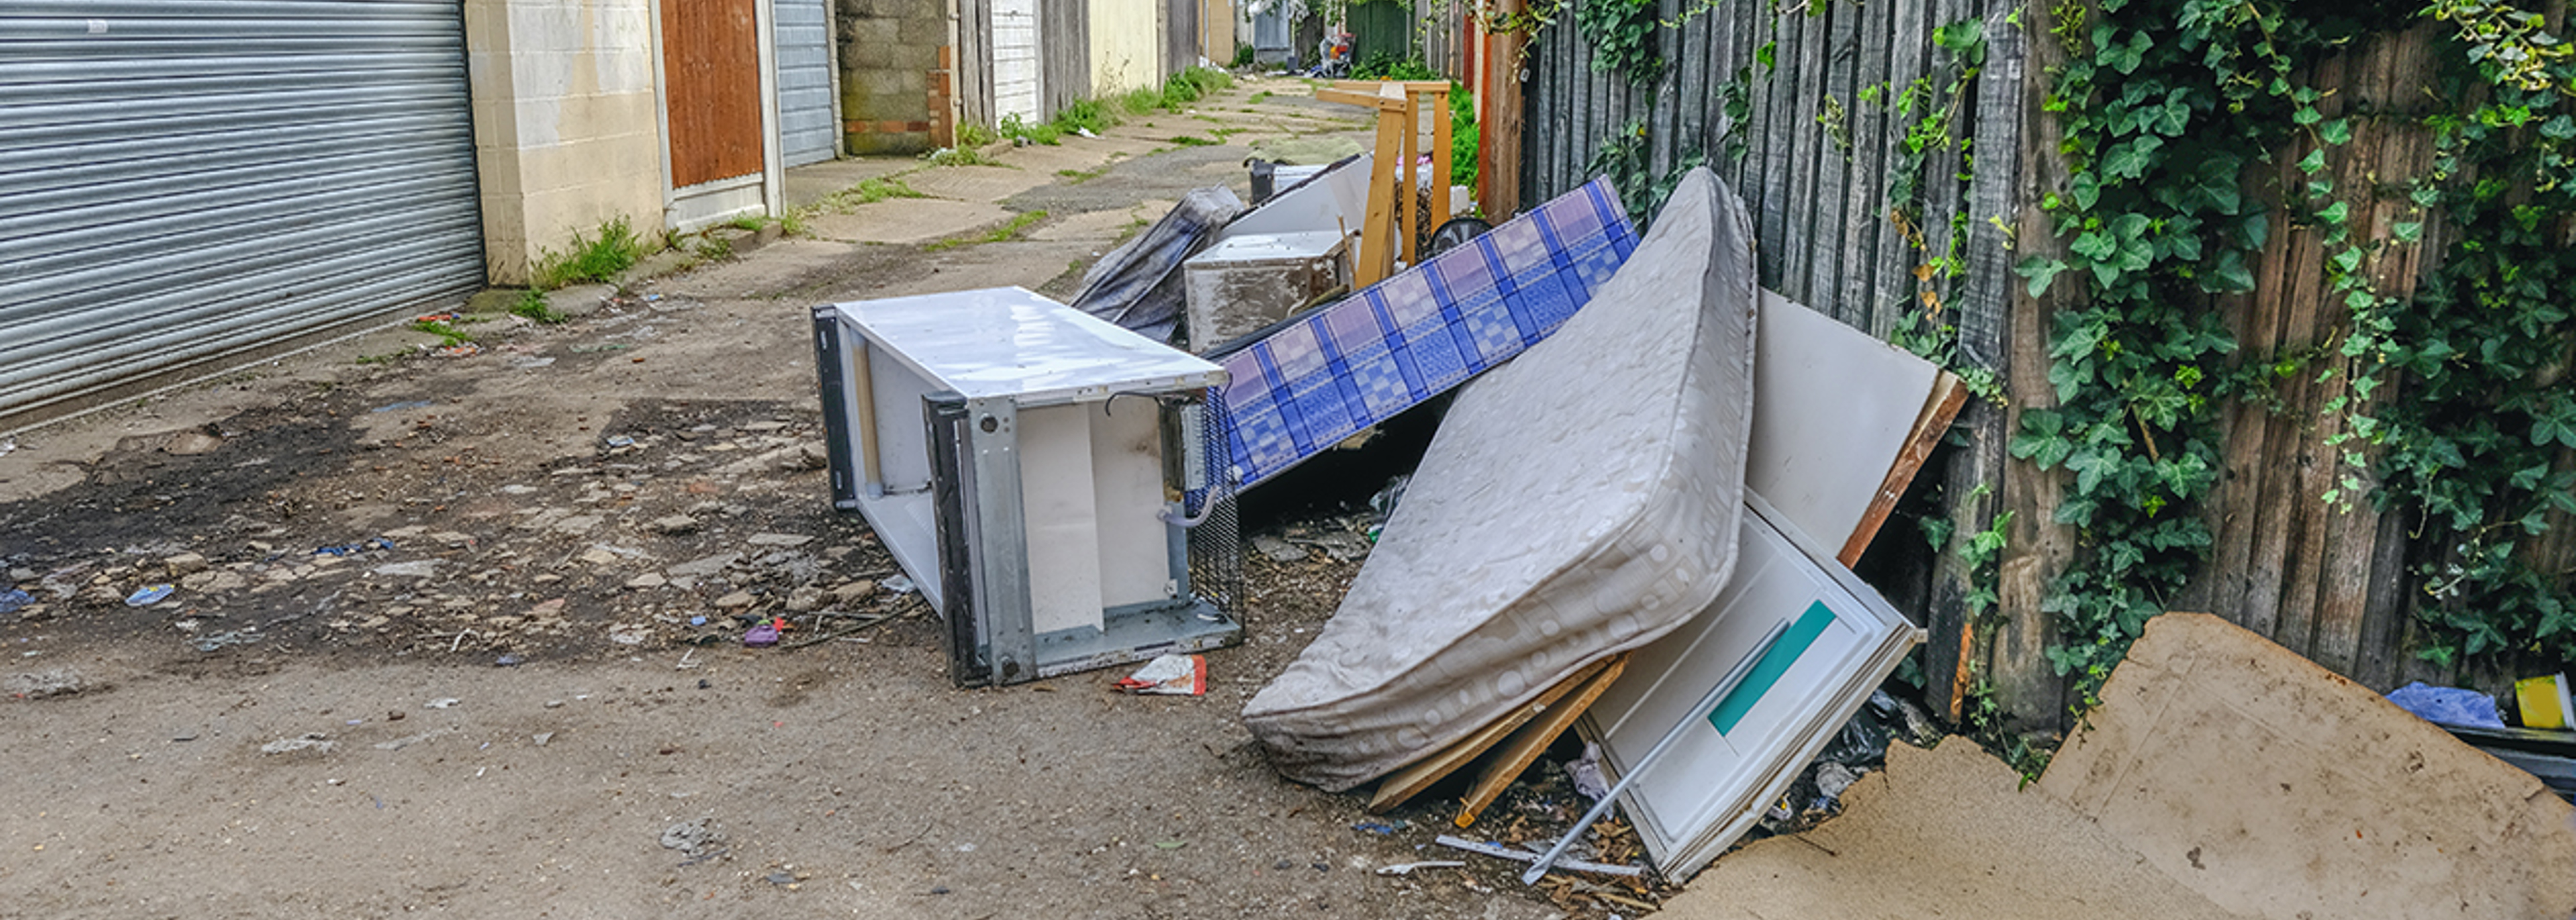 Increased fly-tipping sees greater power given to local authorities